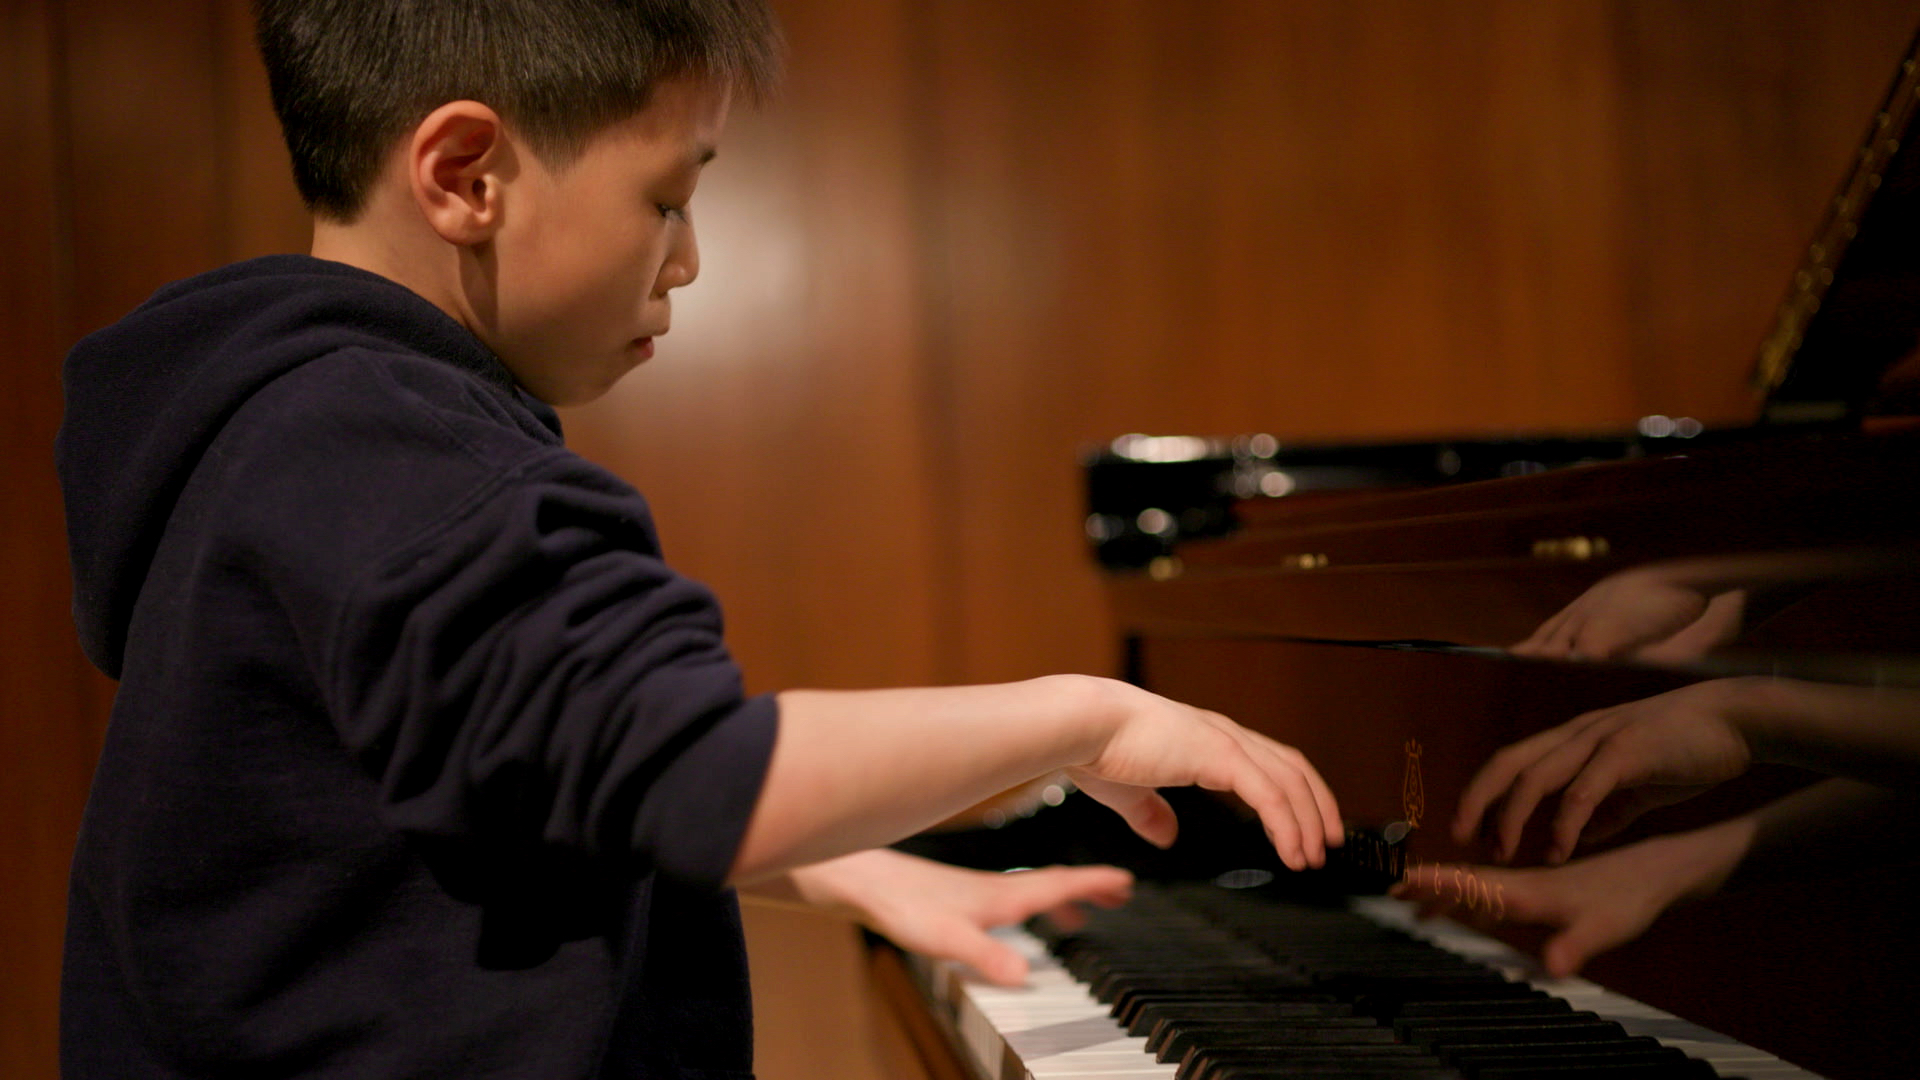 A young person playing piano in a cinematic still image